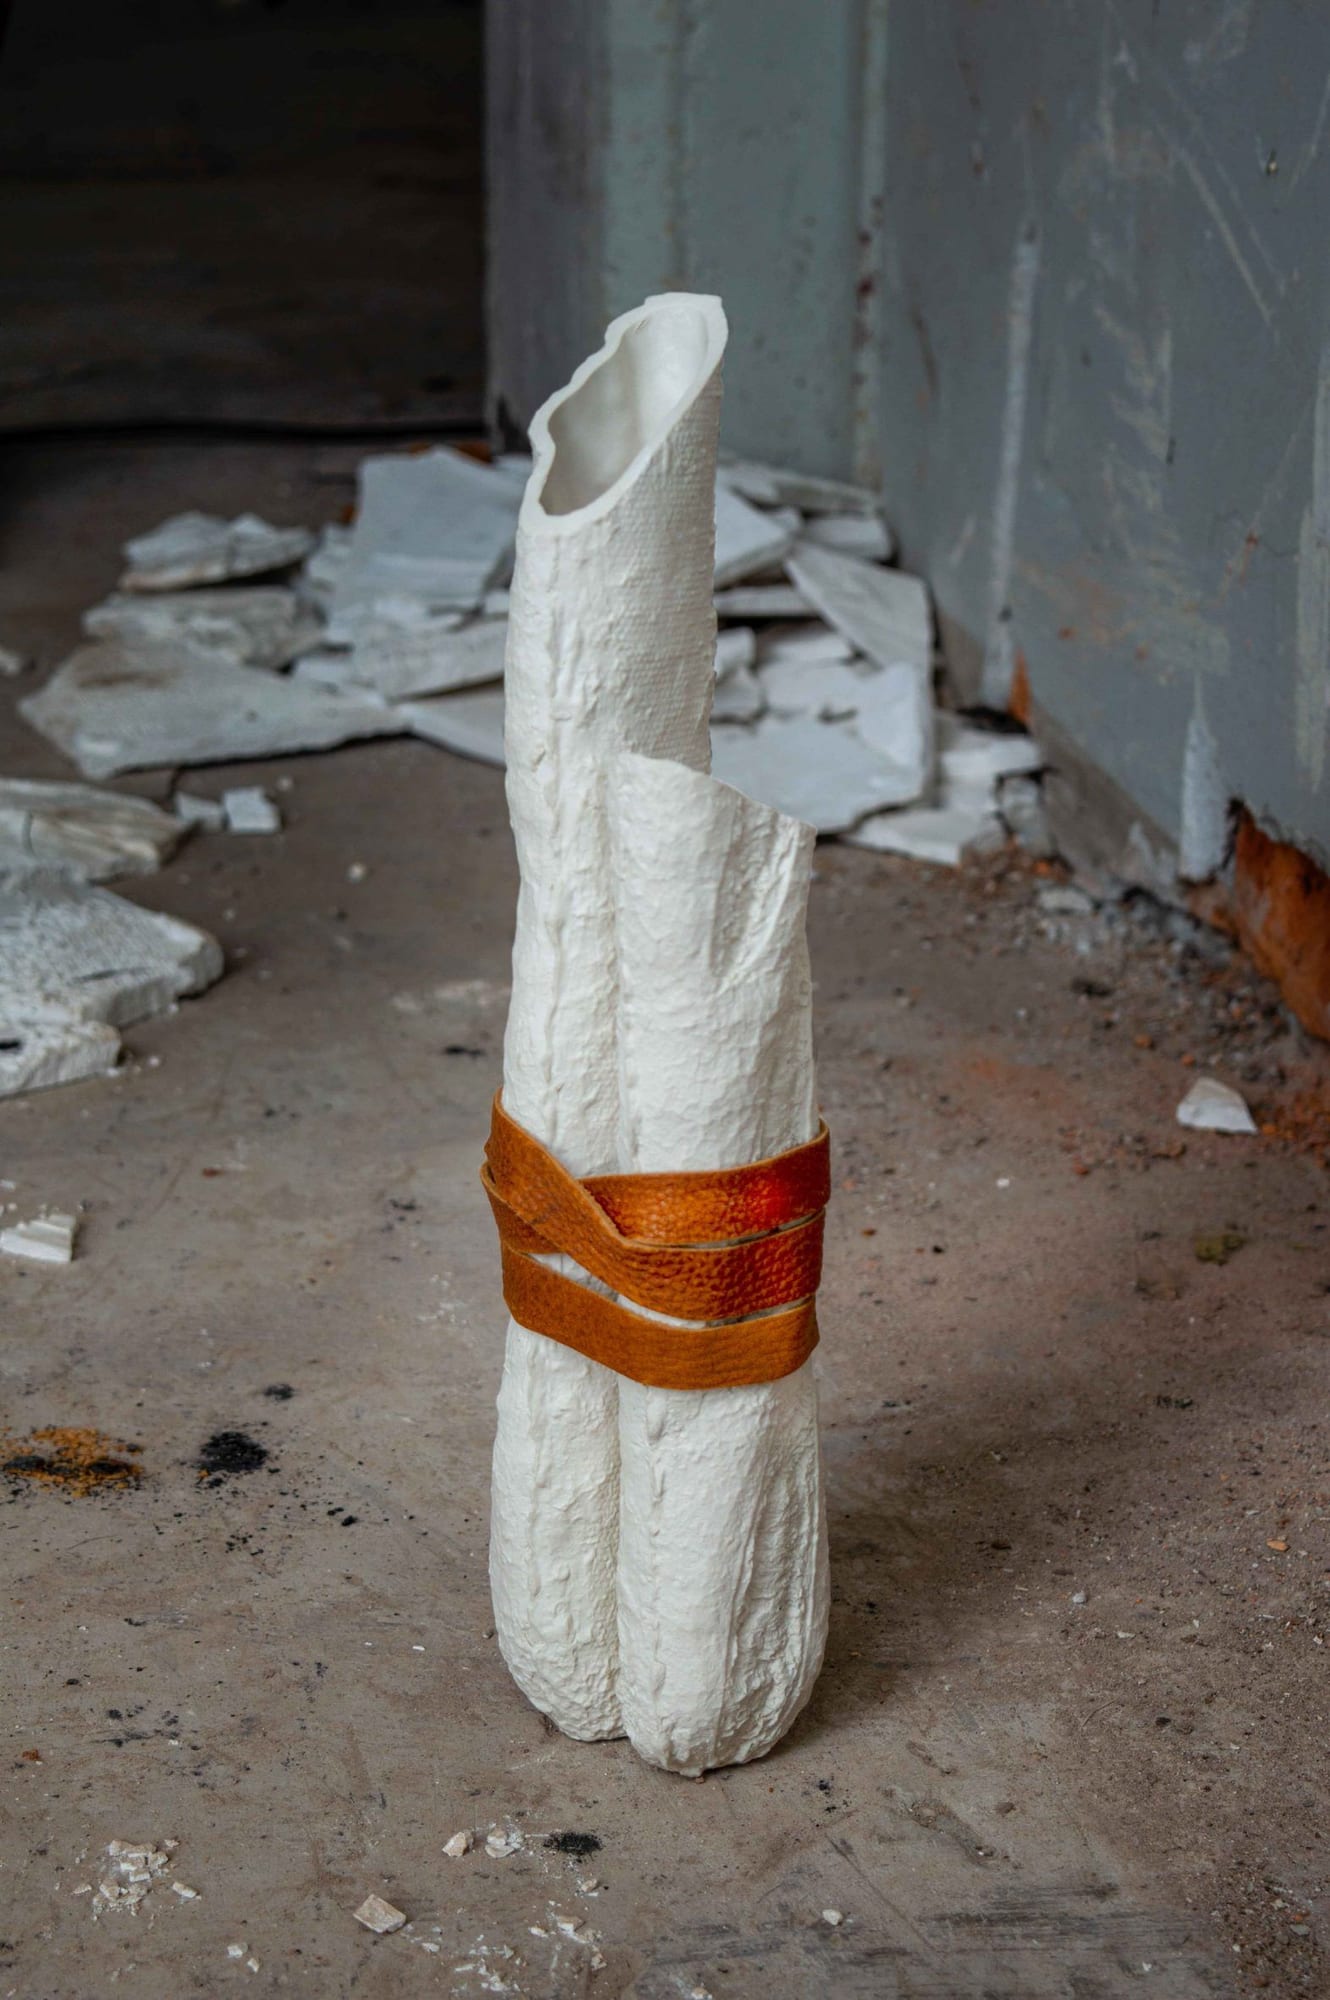 Bruno Baietto-crafted porcelain vase, made from the casting of a baguette baked by his own family in Uruguay.